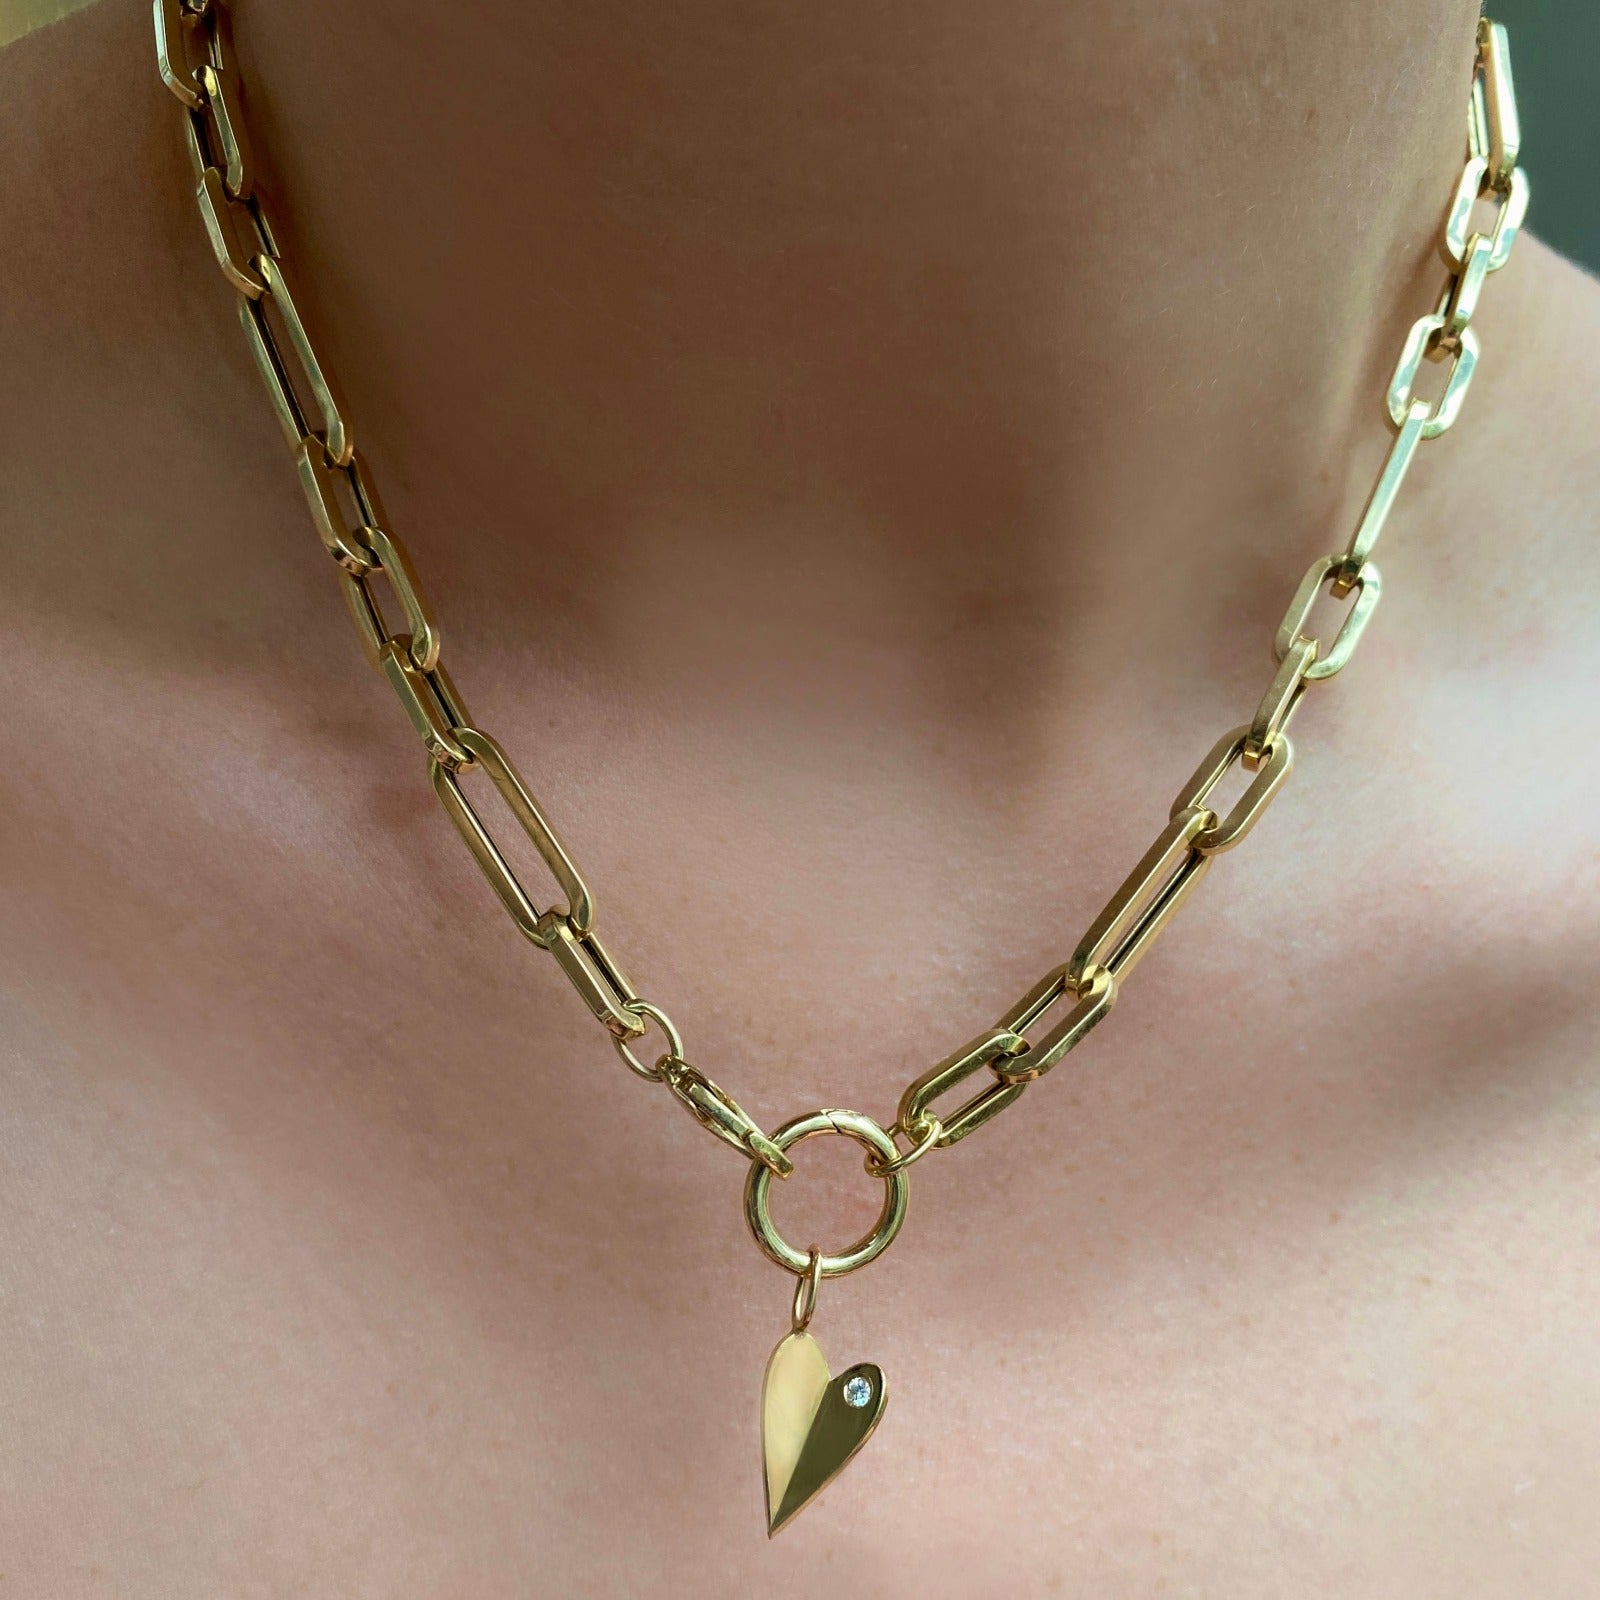 14k gold 13mm Plain Round Charm Lock. Styled on a neck with a folded heart charm hanging from oval clasps of a chunky paperclip chain necklace.